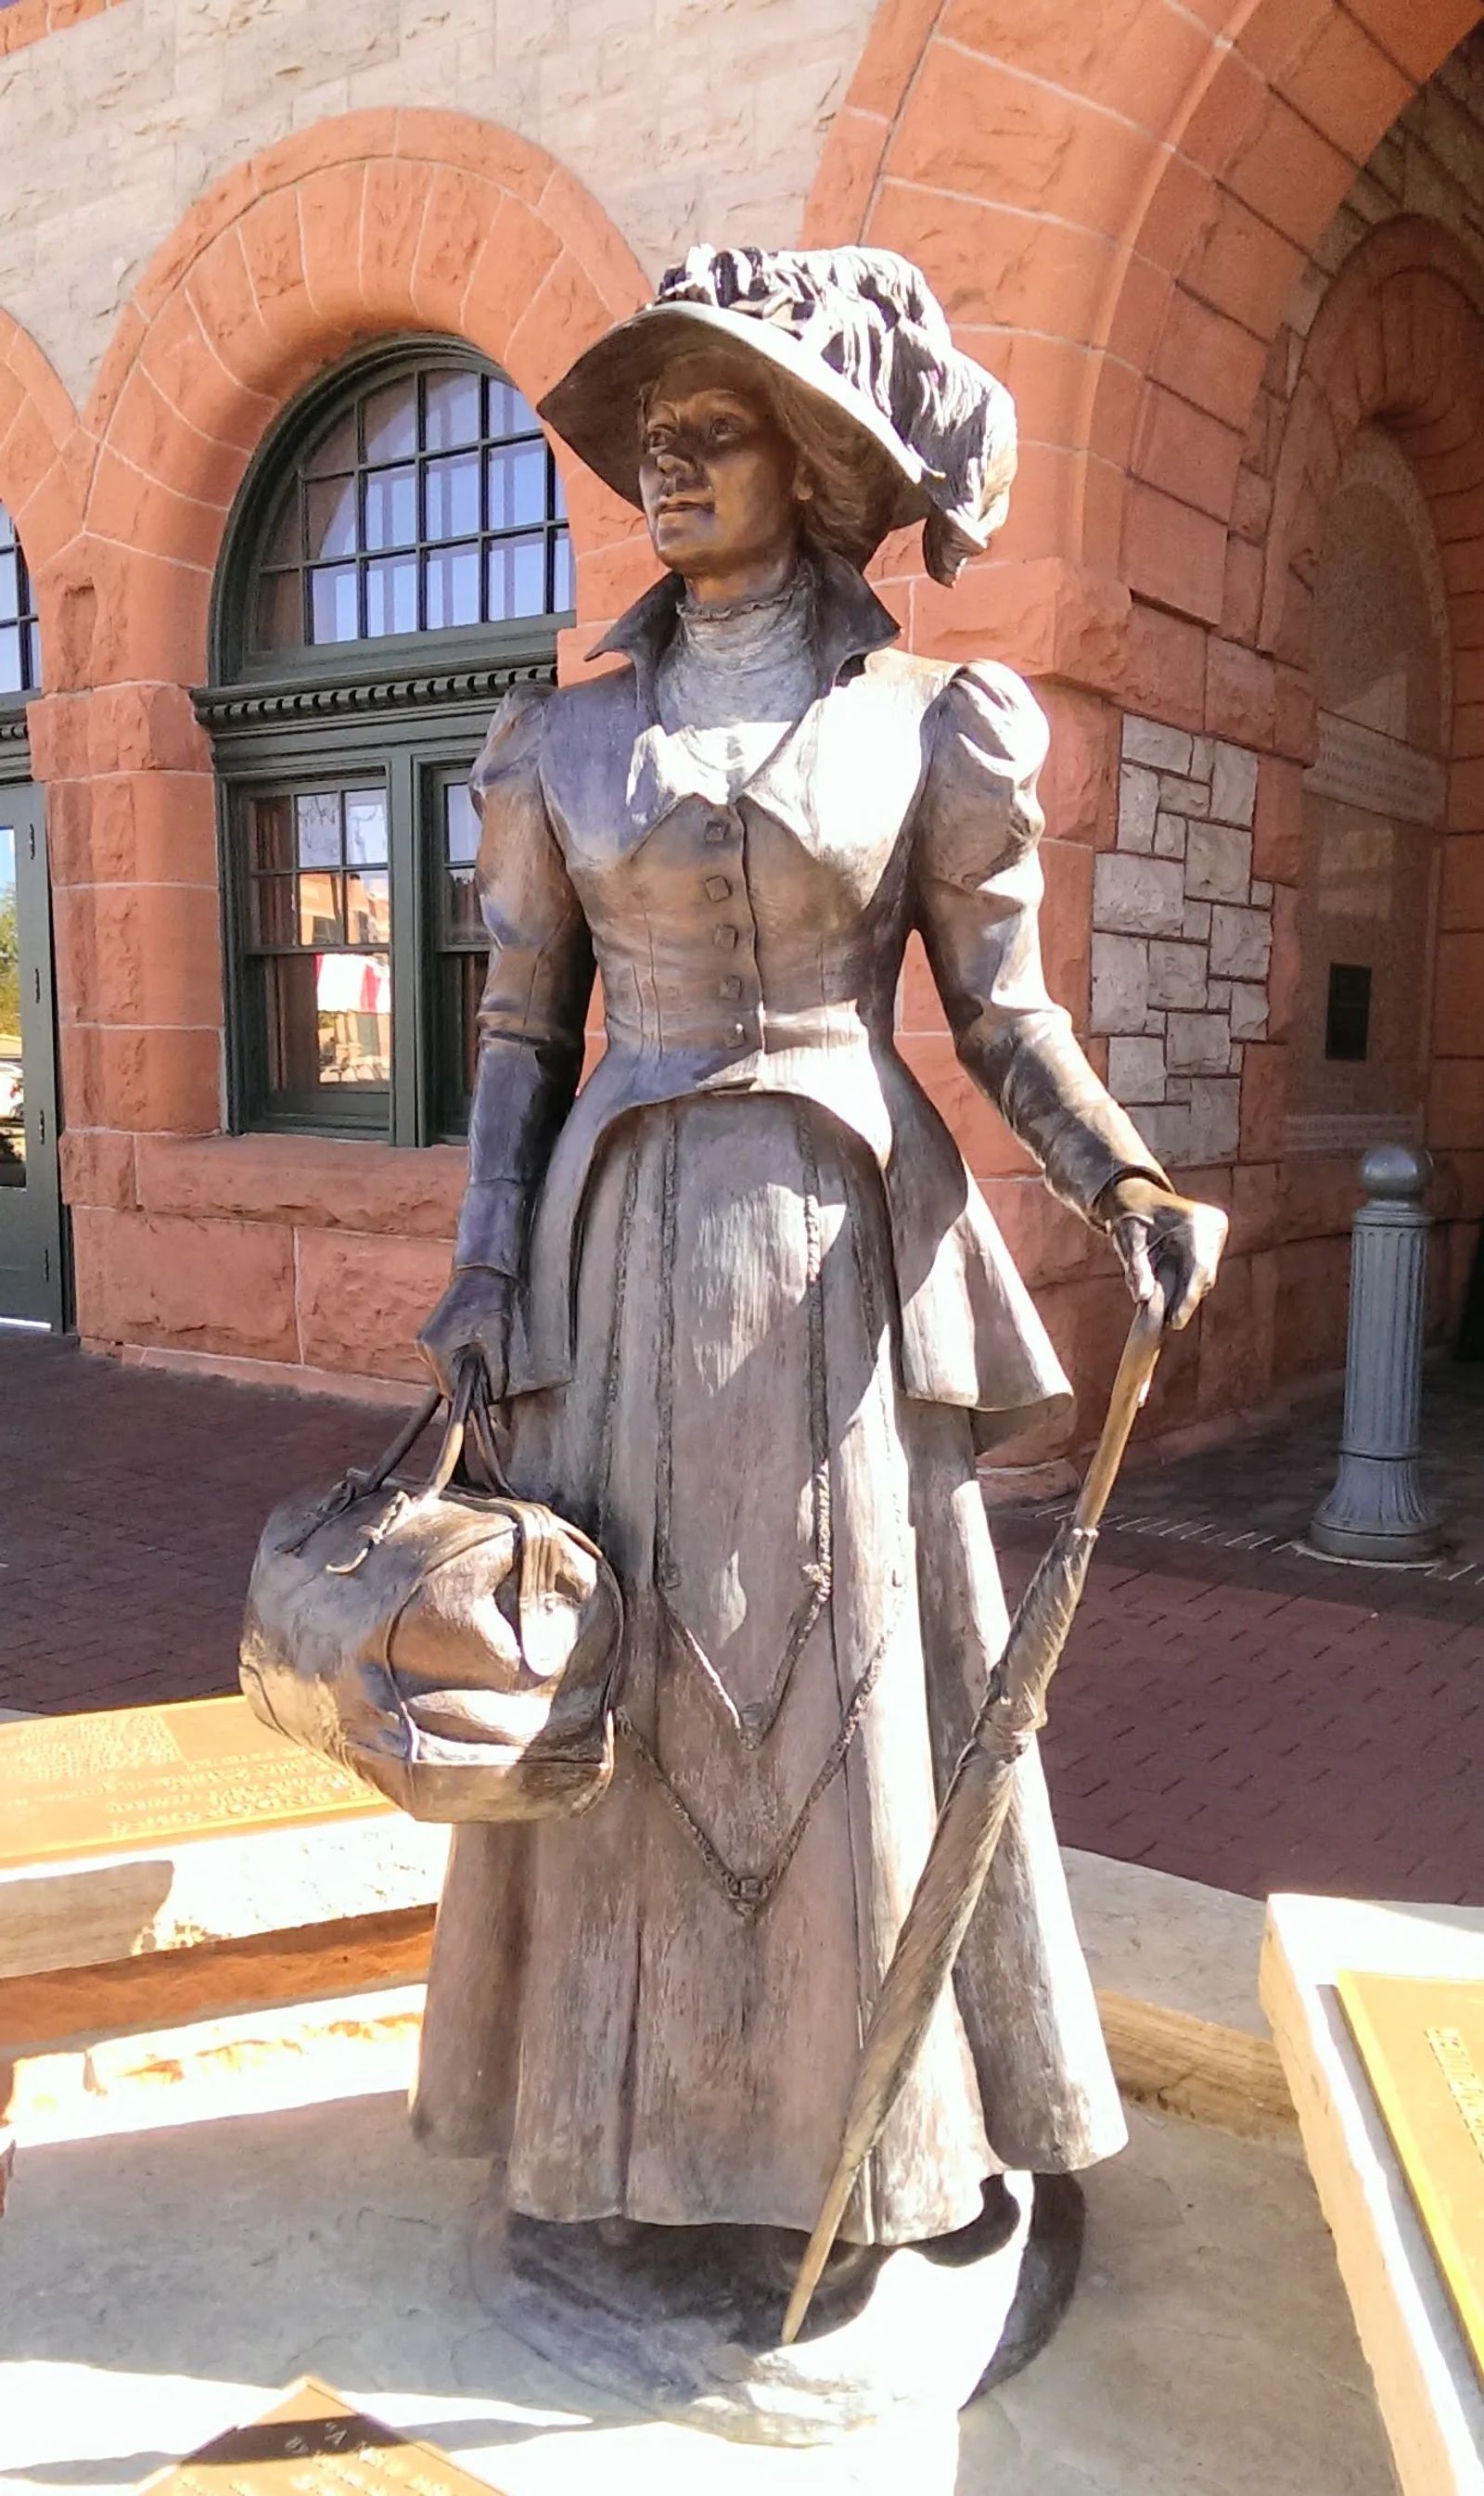 Photo of a sculpture called "a new beginning" in Cheyenne, Wyoming